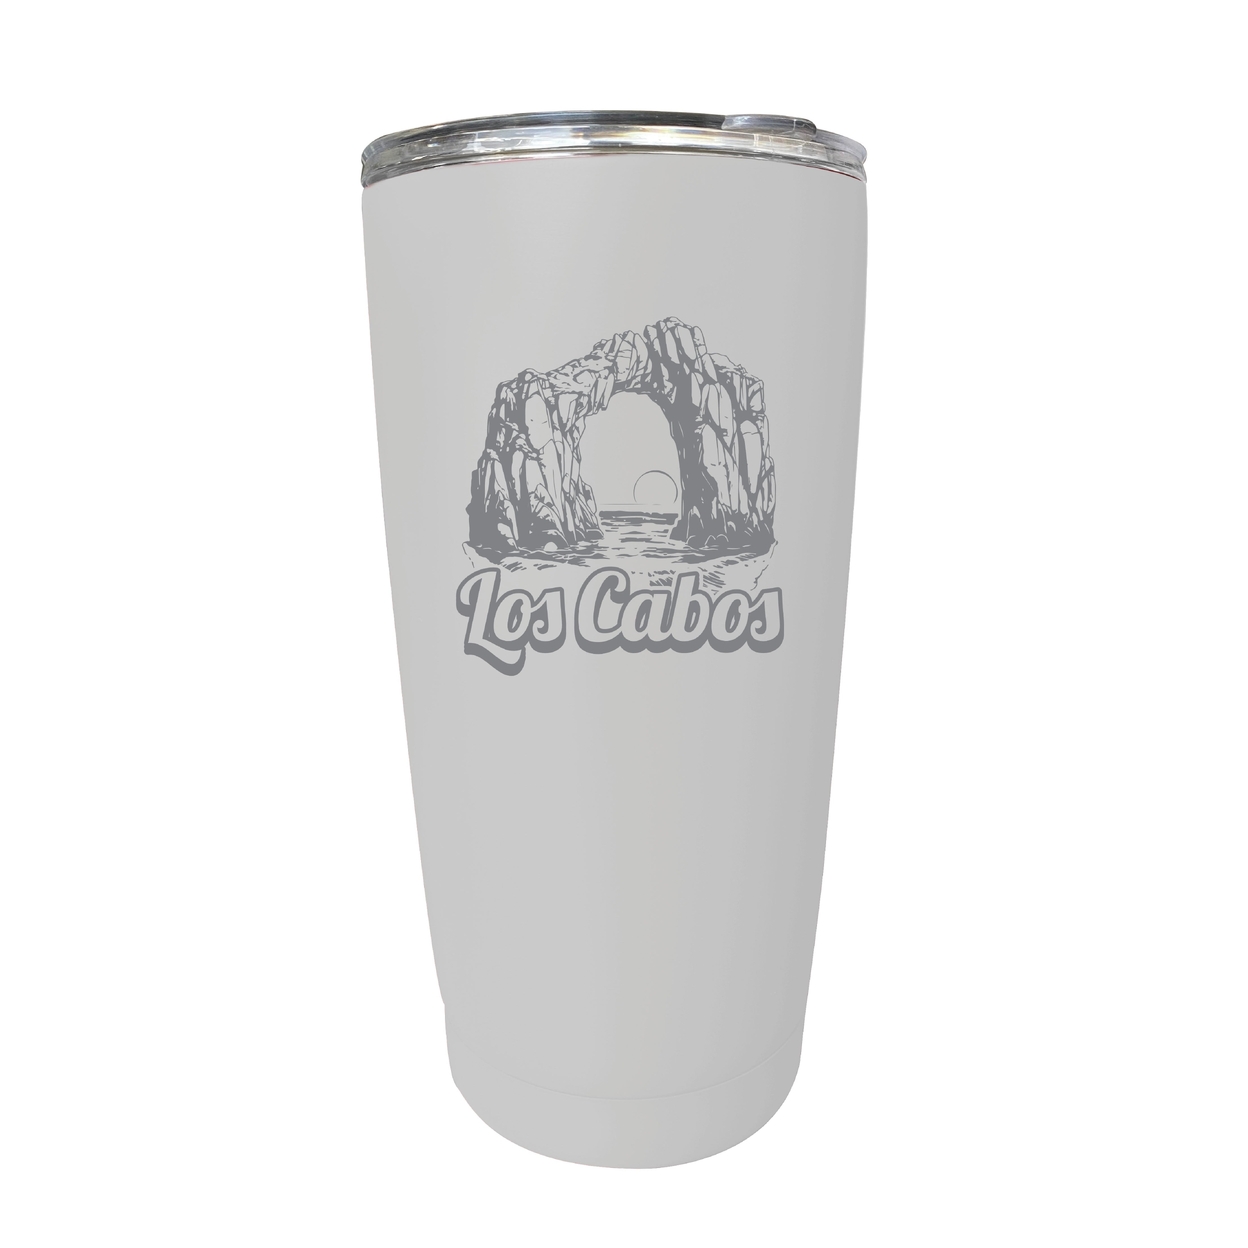 Los Cabos Mexico Souvenir 16 Oz Engraved Stainless Steel Insulated Tumbler - White,,4-Pack